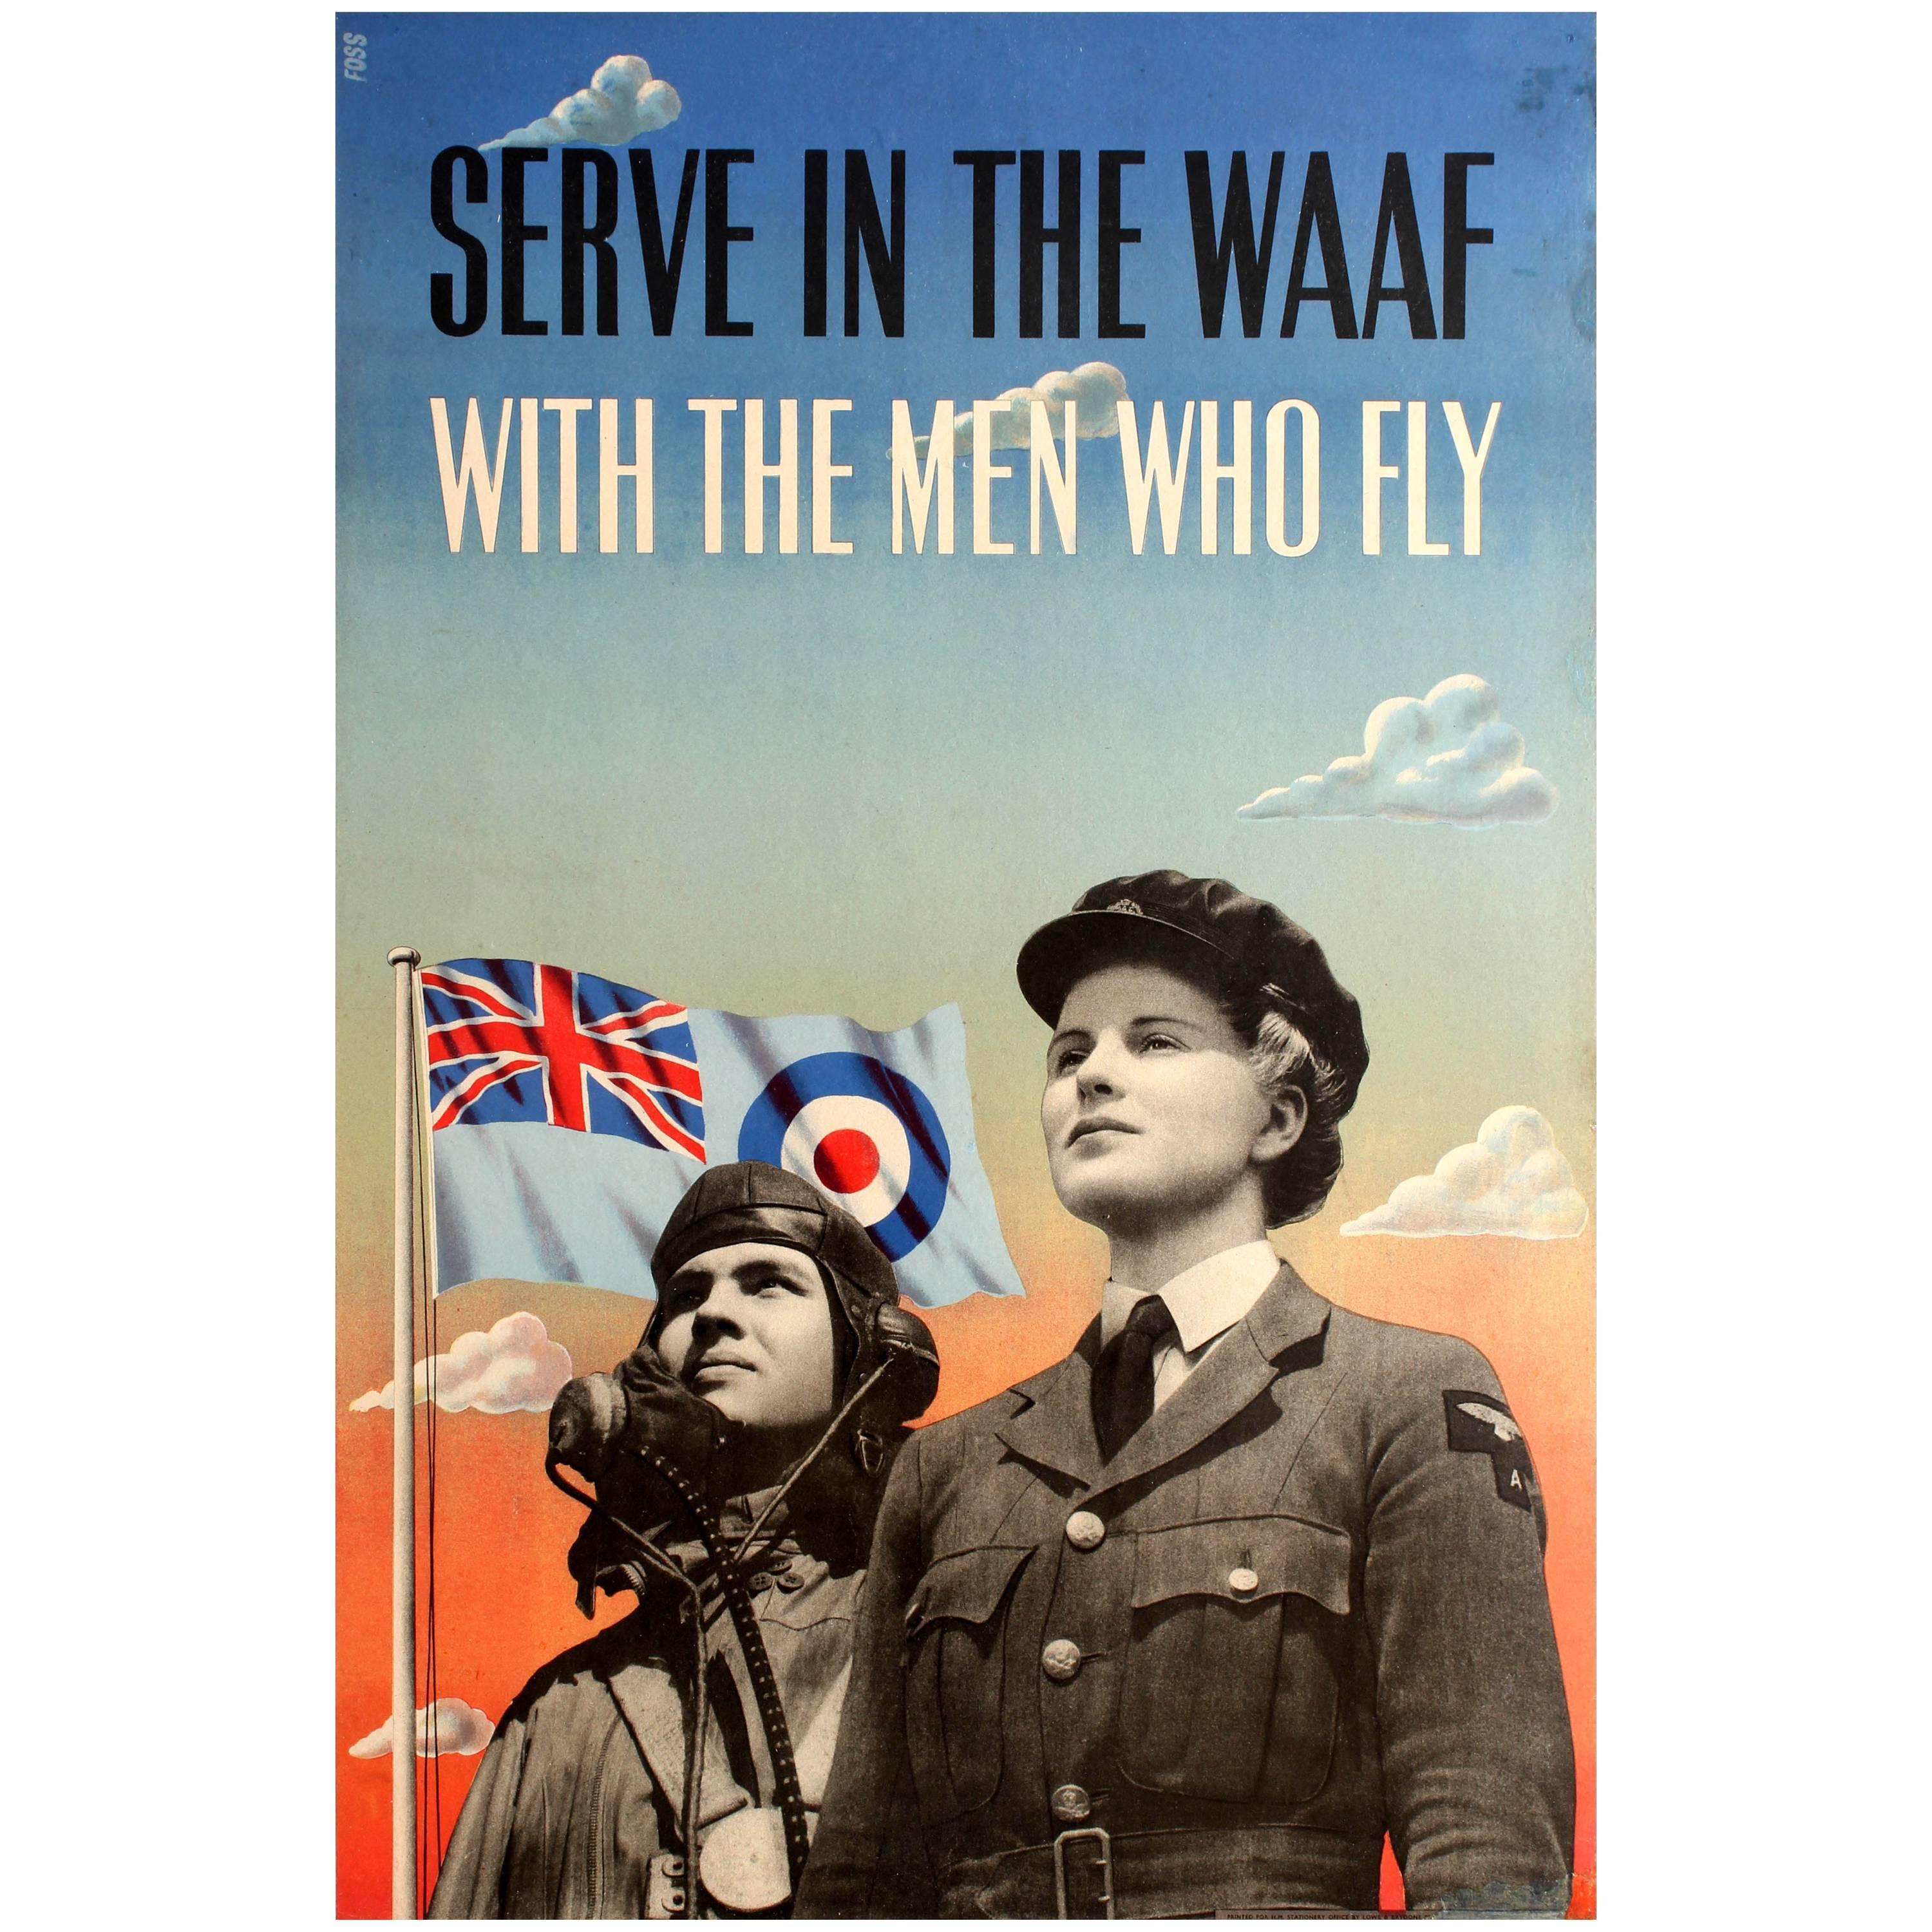 Original WWII Royal Air Force Poster - Serve In The WAAF With The Men Who Fly